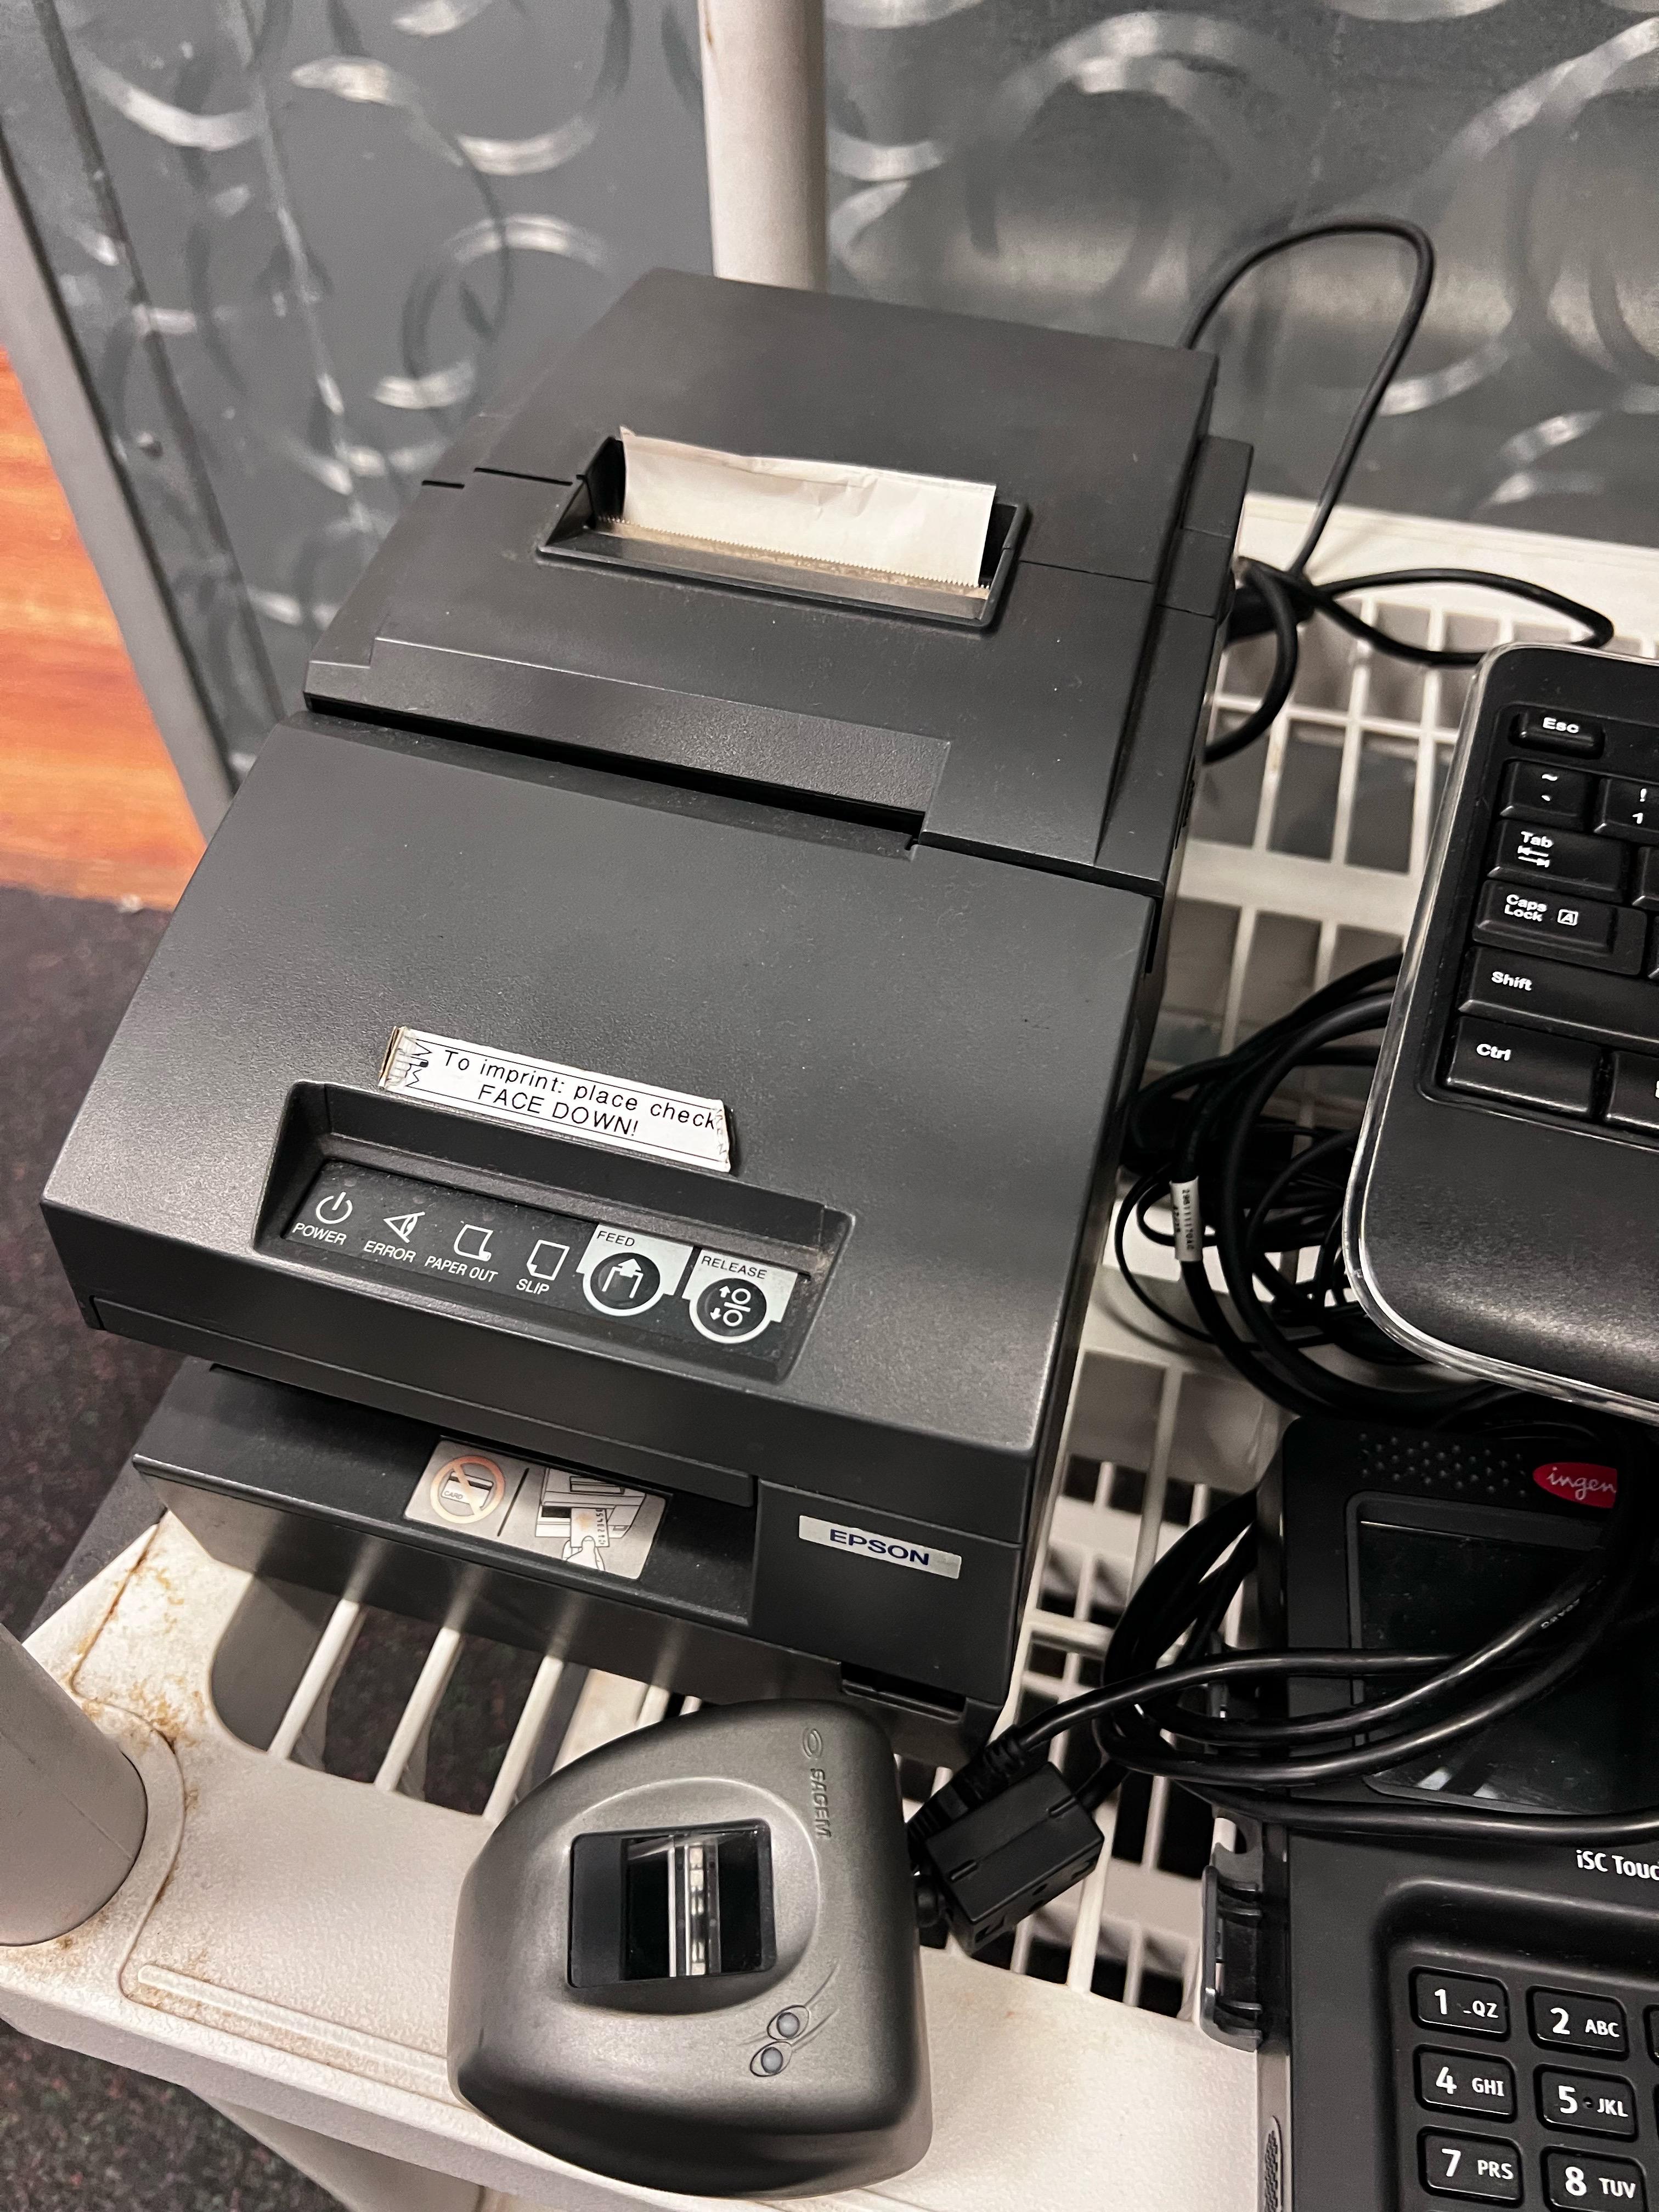 SYMANTIC COMPUTER CASH REGISTER SYSTEM WITH CASH BOX, CARD READER AND PRINTER